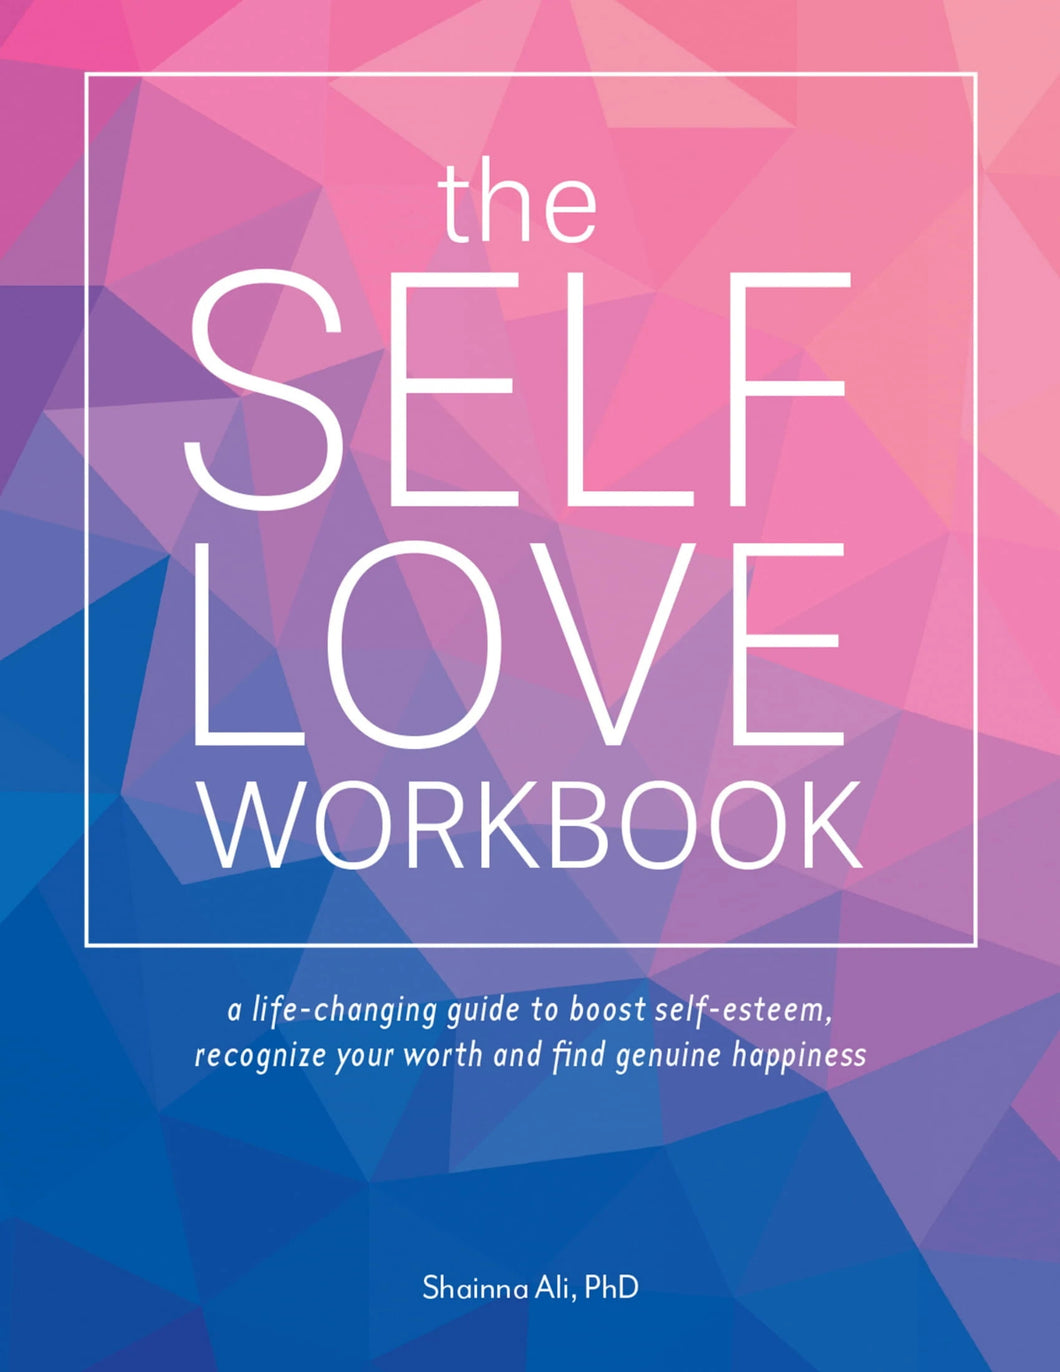 The Self-Love Workbook: A Life-Changing Guide to Boost Self-Esteem, Recognize Your Worth and Find Genuine Happiness (Self-Love Books)